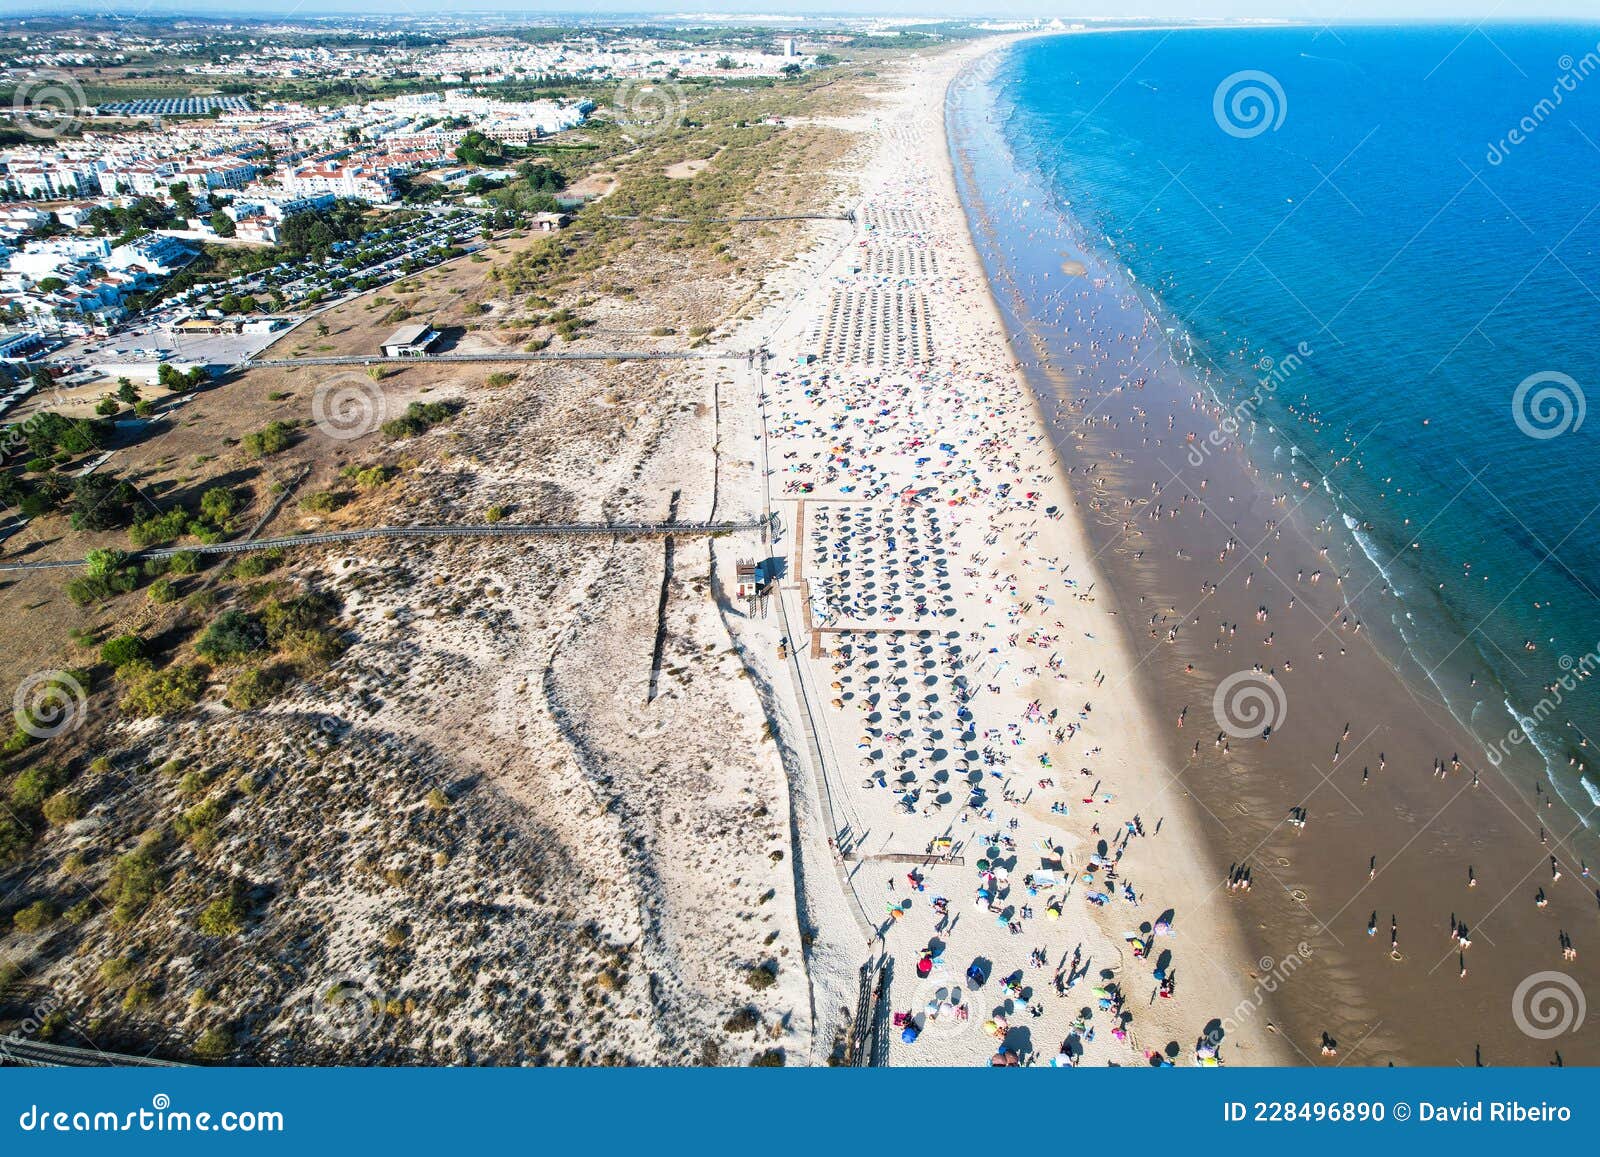 aerial view of manta rota beach, which is part of a long sweep of fine sand